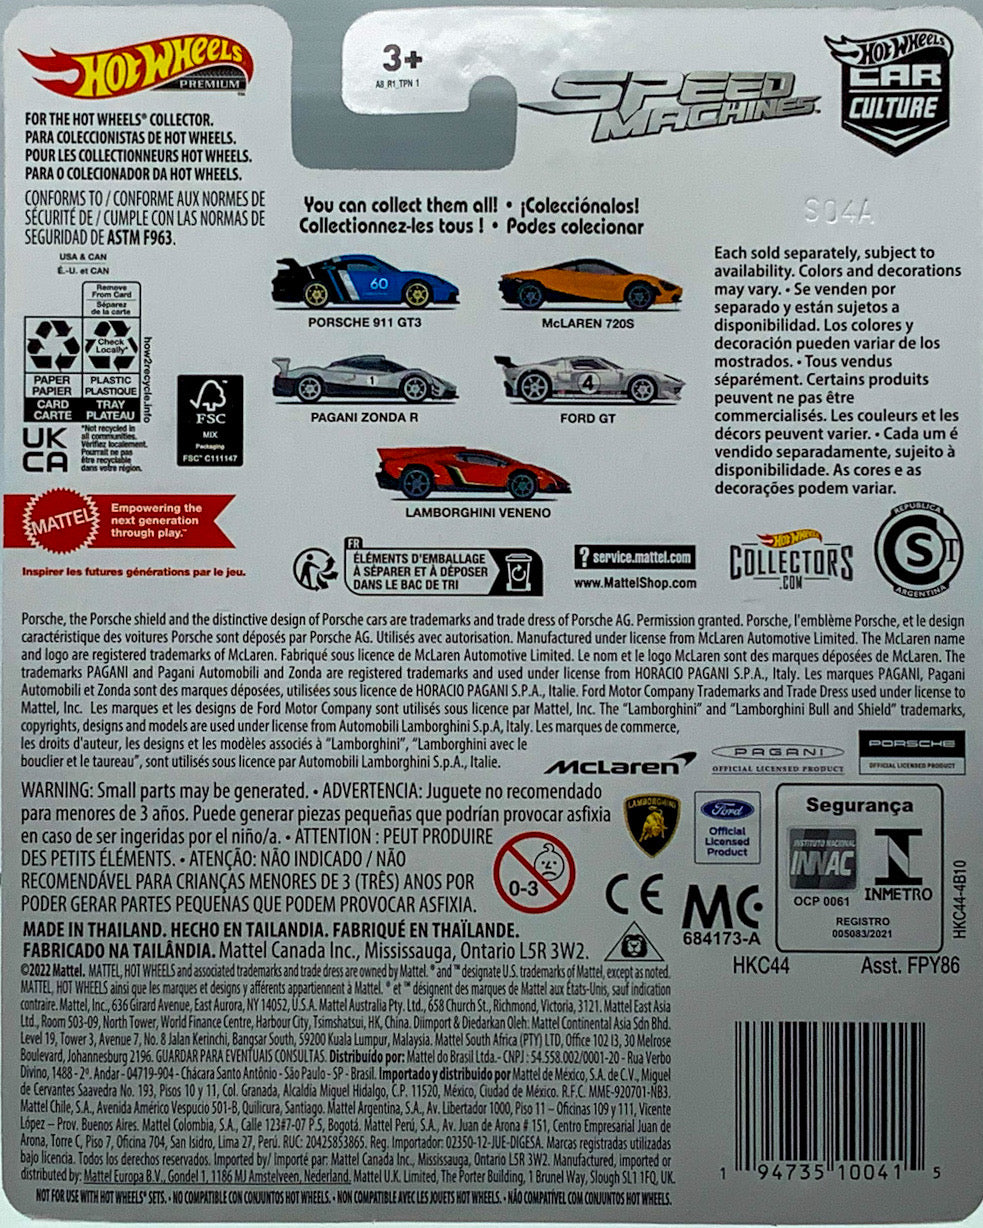 Buy at Tatoyshop.com Products Direct from Shipper Manufacturer Box Made in Thailand Hot Wheels Cars Toys Mattel FPY86 00887961619805   Buy at www.tatoyshop.com Back of the Card shows the 5 Cars on the Series  Porsche 911 GT3 (2022) 1/5 McLaren 720S 2/5 Pagani Zonda R 3/5 Ford GT LM 4/5 Lamborghini Veneno 5/5